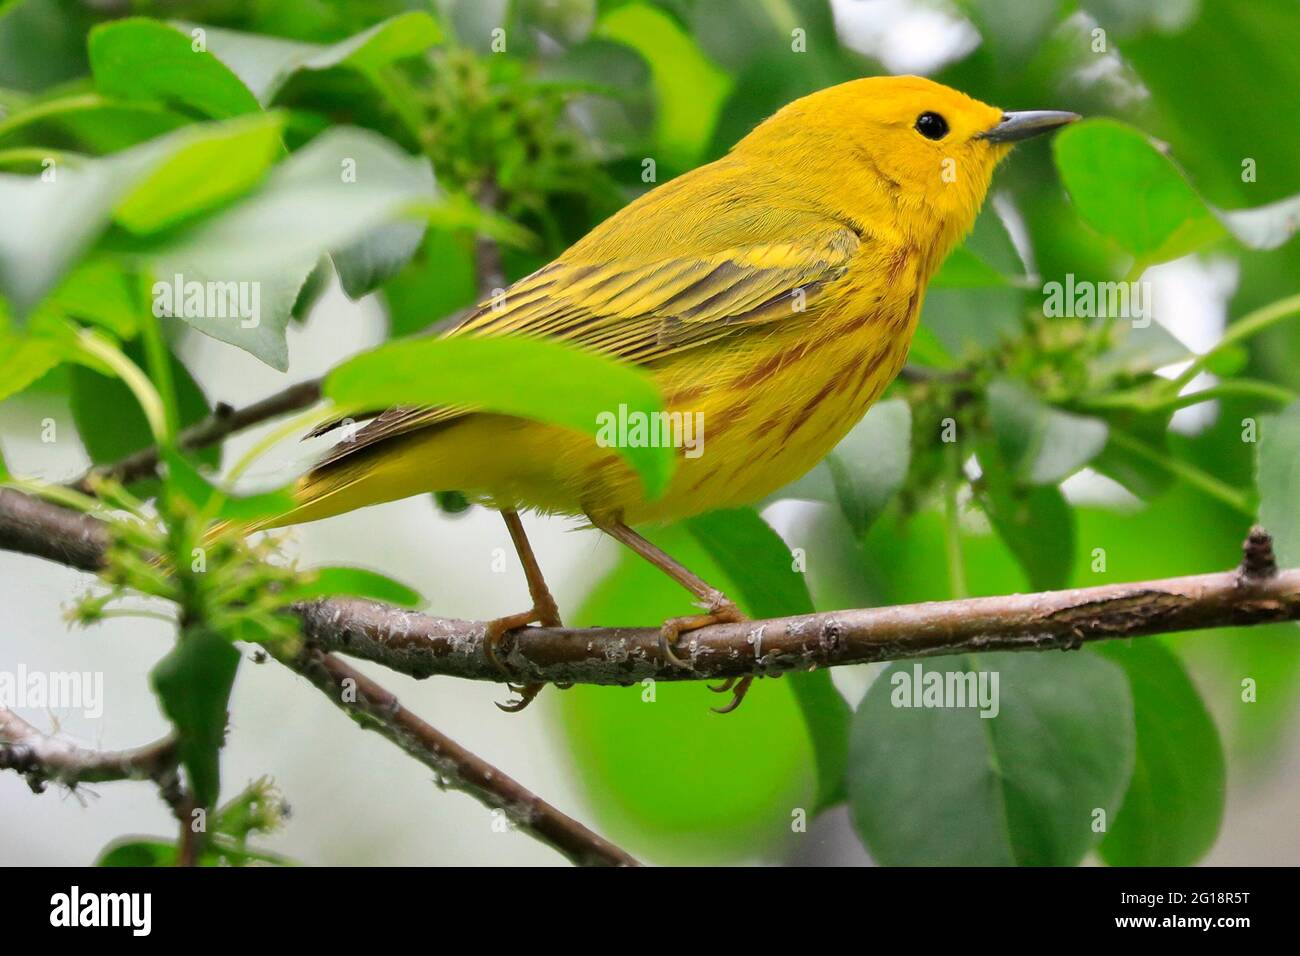 American Yellow Warble sitting on a tree brunch with green background, Quebec, Canada Stock Photo